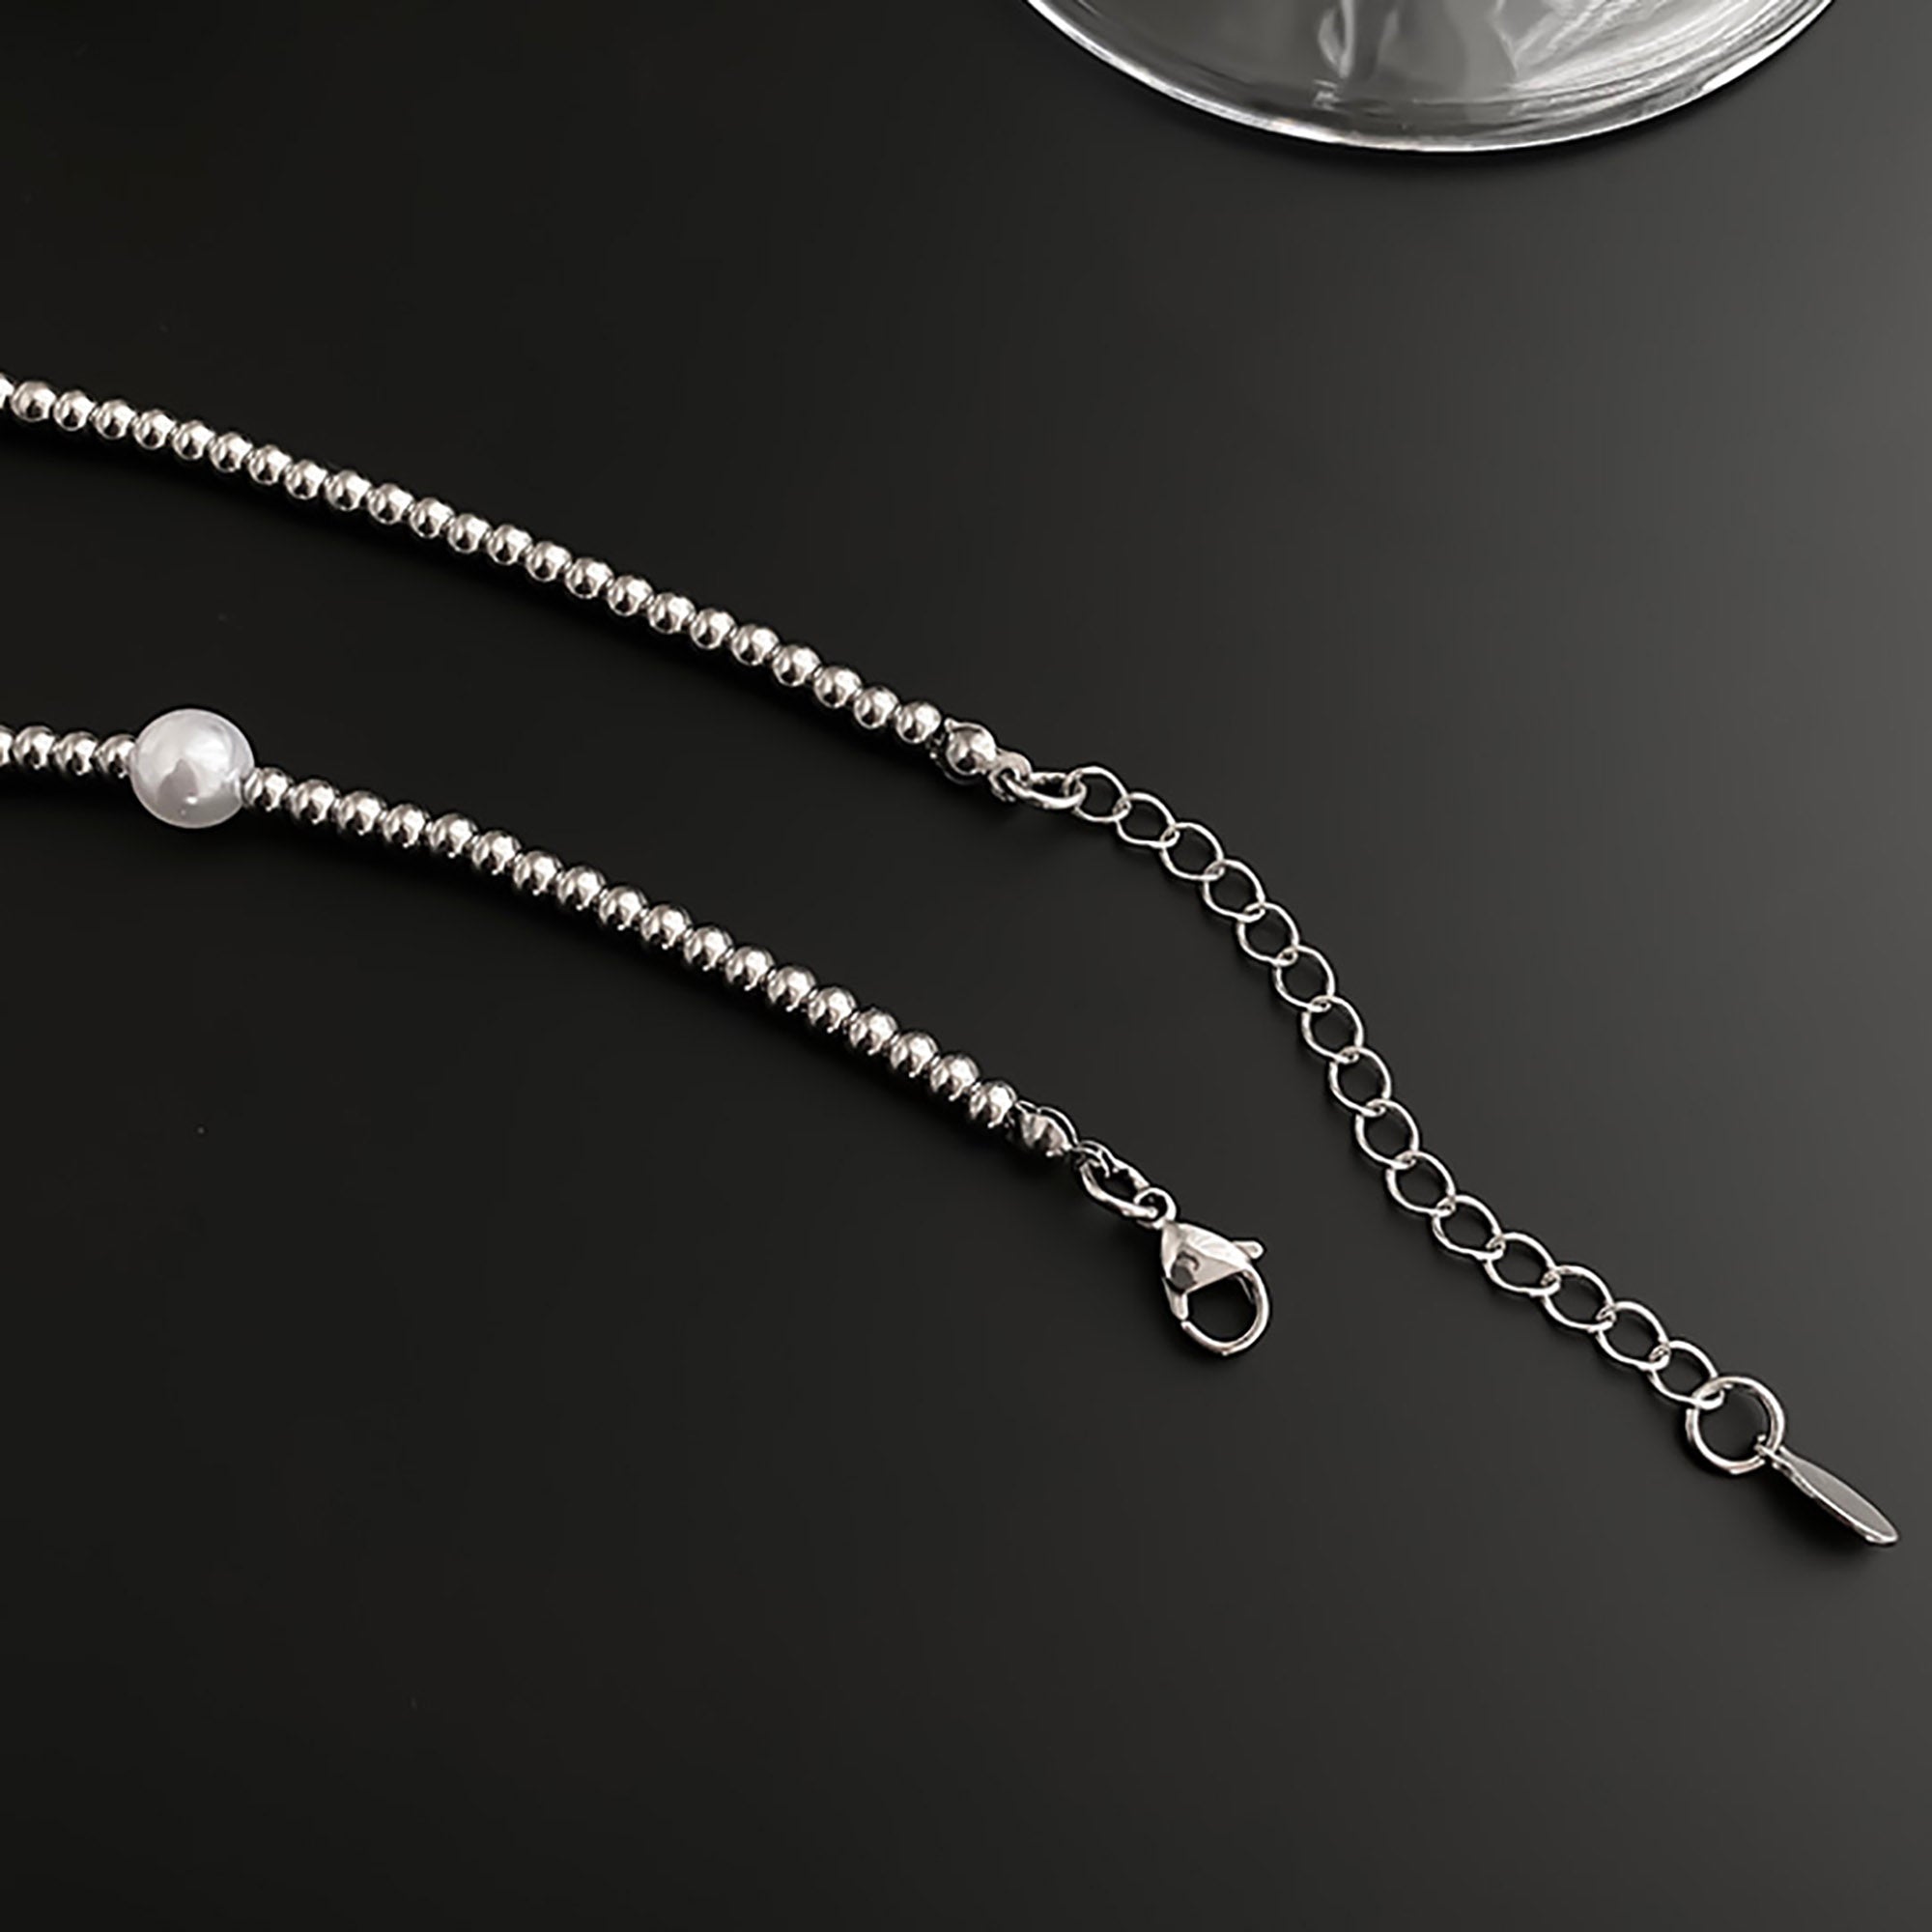 Stainless Steel Ball w/ Pearl Necklace Valentine Day Gift KOL / Youtuber / Celebrity / Fashion Icon styling